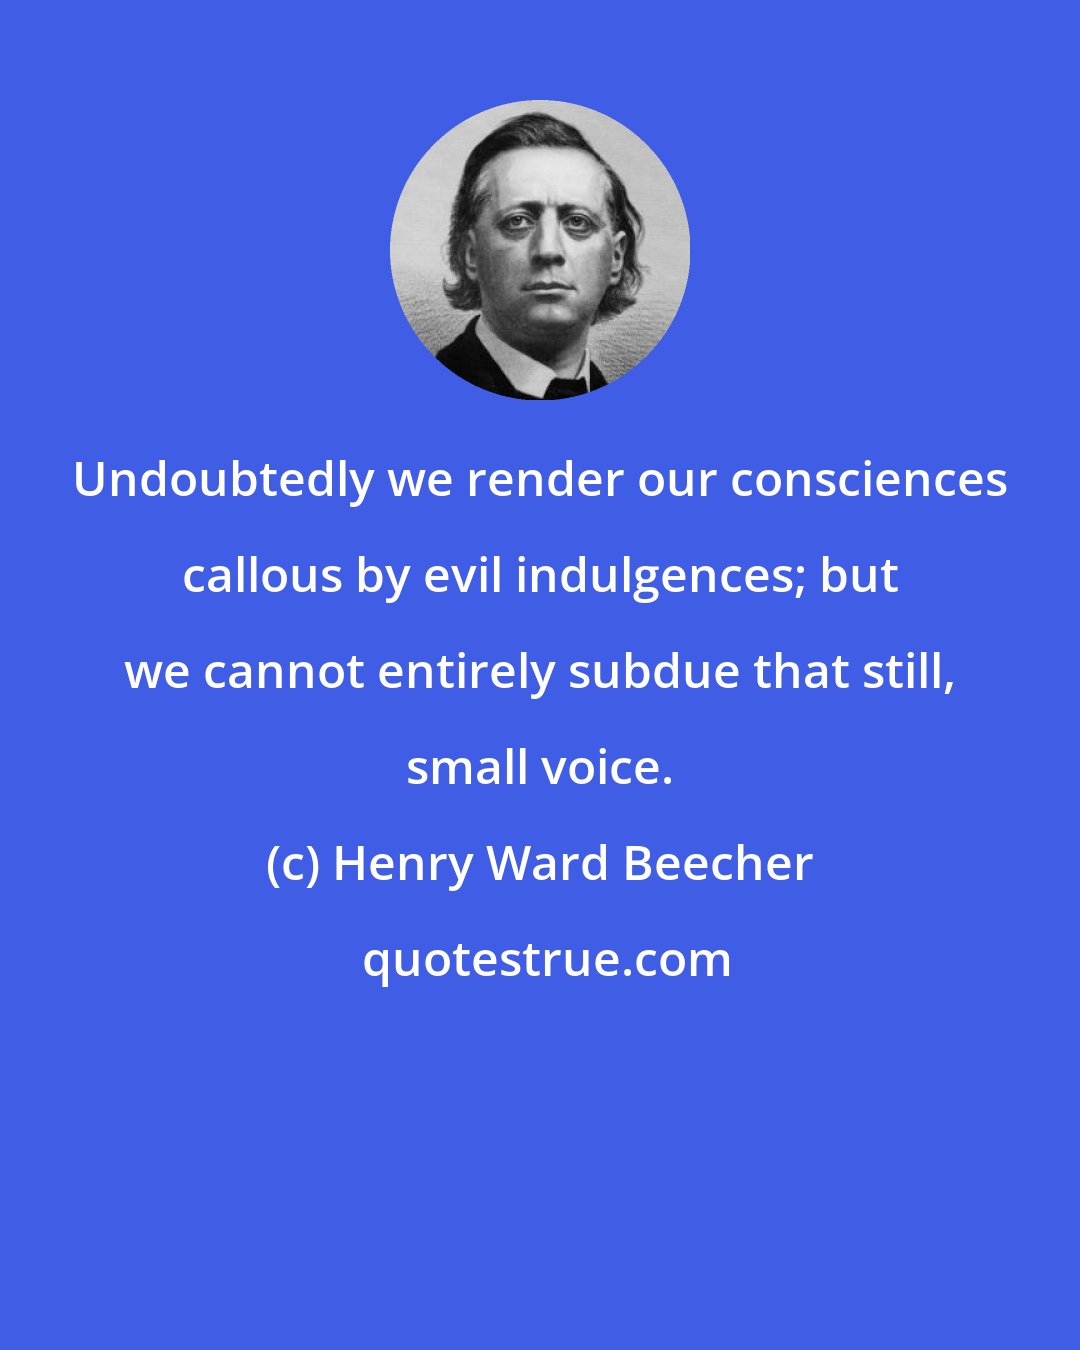 Henry Ward Beecher: Undoubtedly we render our consciences callous by evil indulgences; but we cannot entirely subdue that still, small voice.